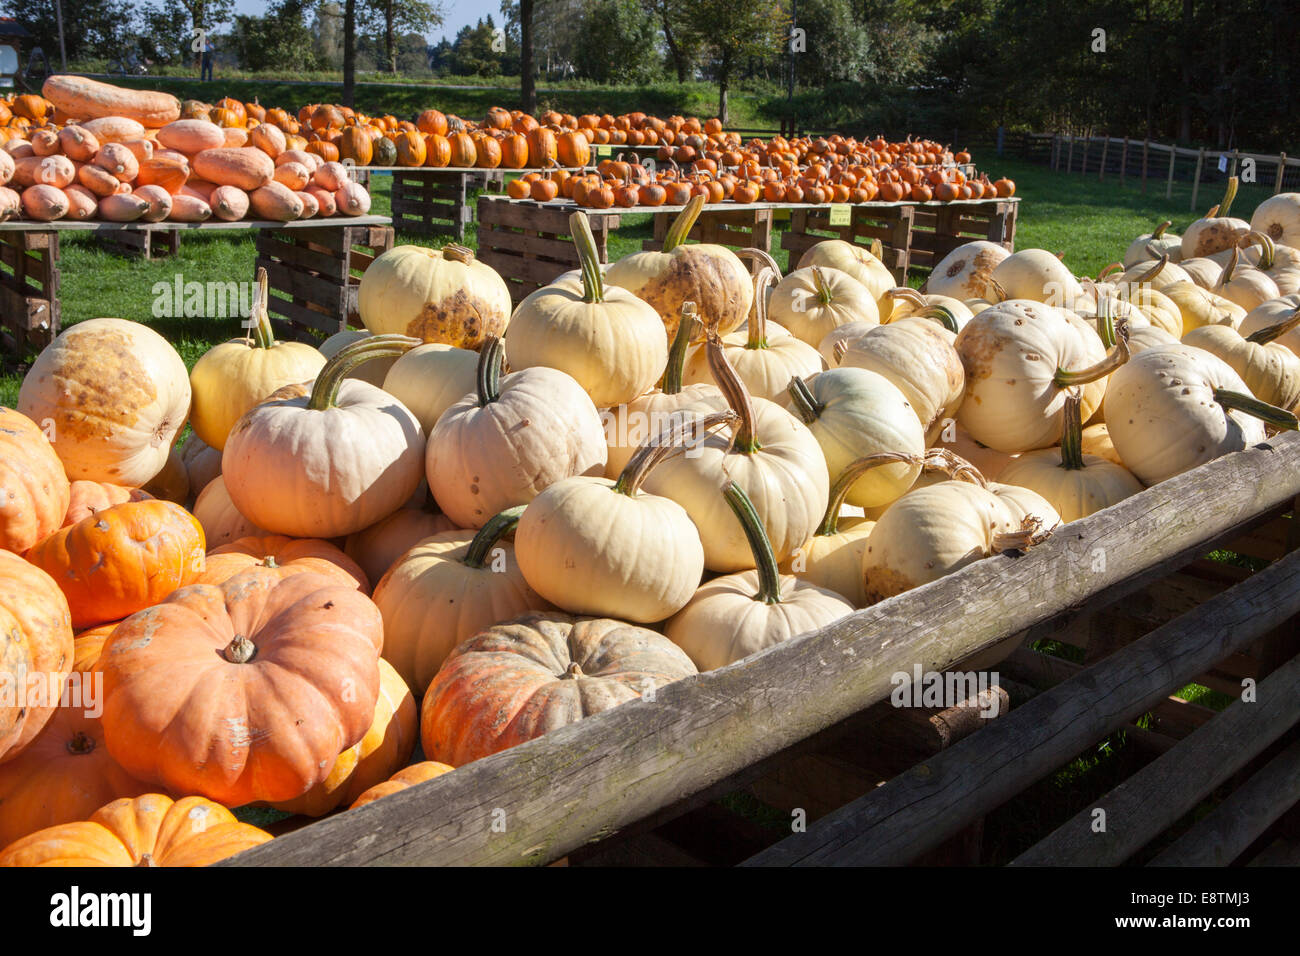 different marrows and squashes, pumpkins, for sale, Germany, Europe, Stock Photo